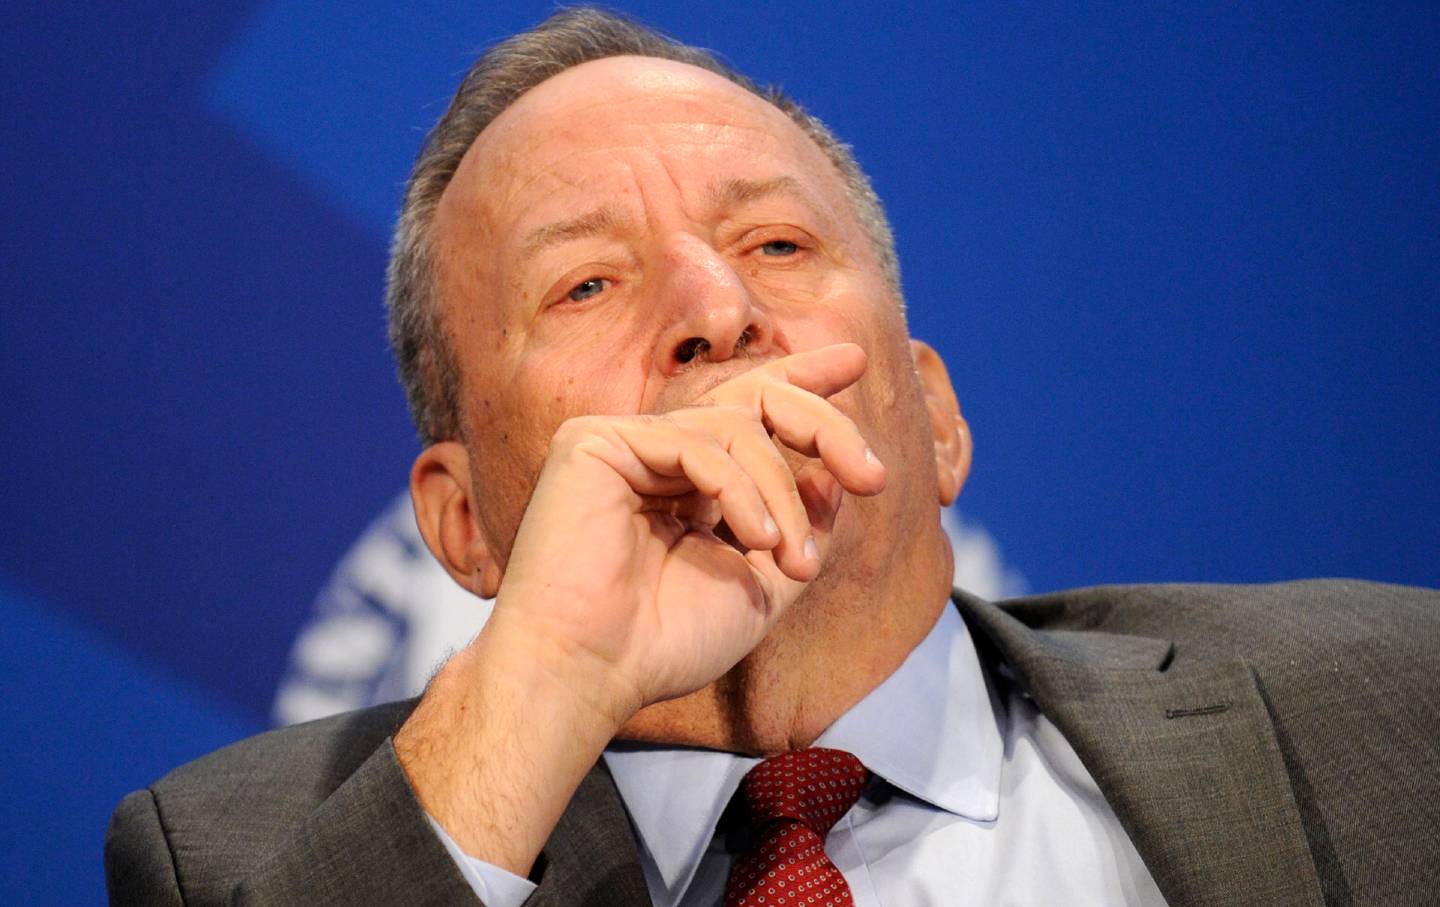 Former Treasury secretary and current Harvard professor Larry Summers listens to remarks during a discussion on low-income developing countries at the annual IMF and World Bank Spring Meetings, April 13, 2016, in Washington, DC. / AFP / Mike Theiler (Photo credit should read MIKE THEILER/AFP via Getty Images)